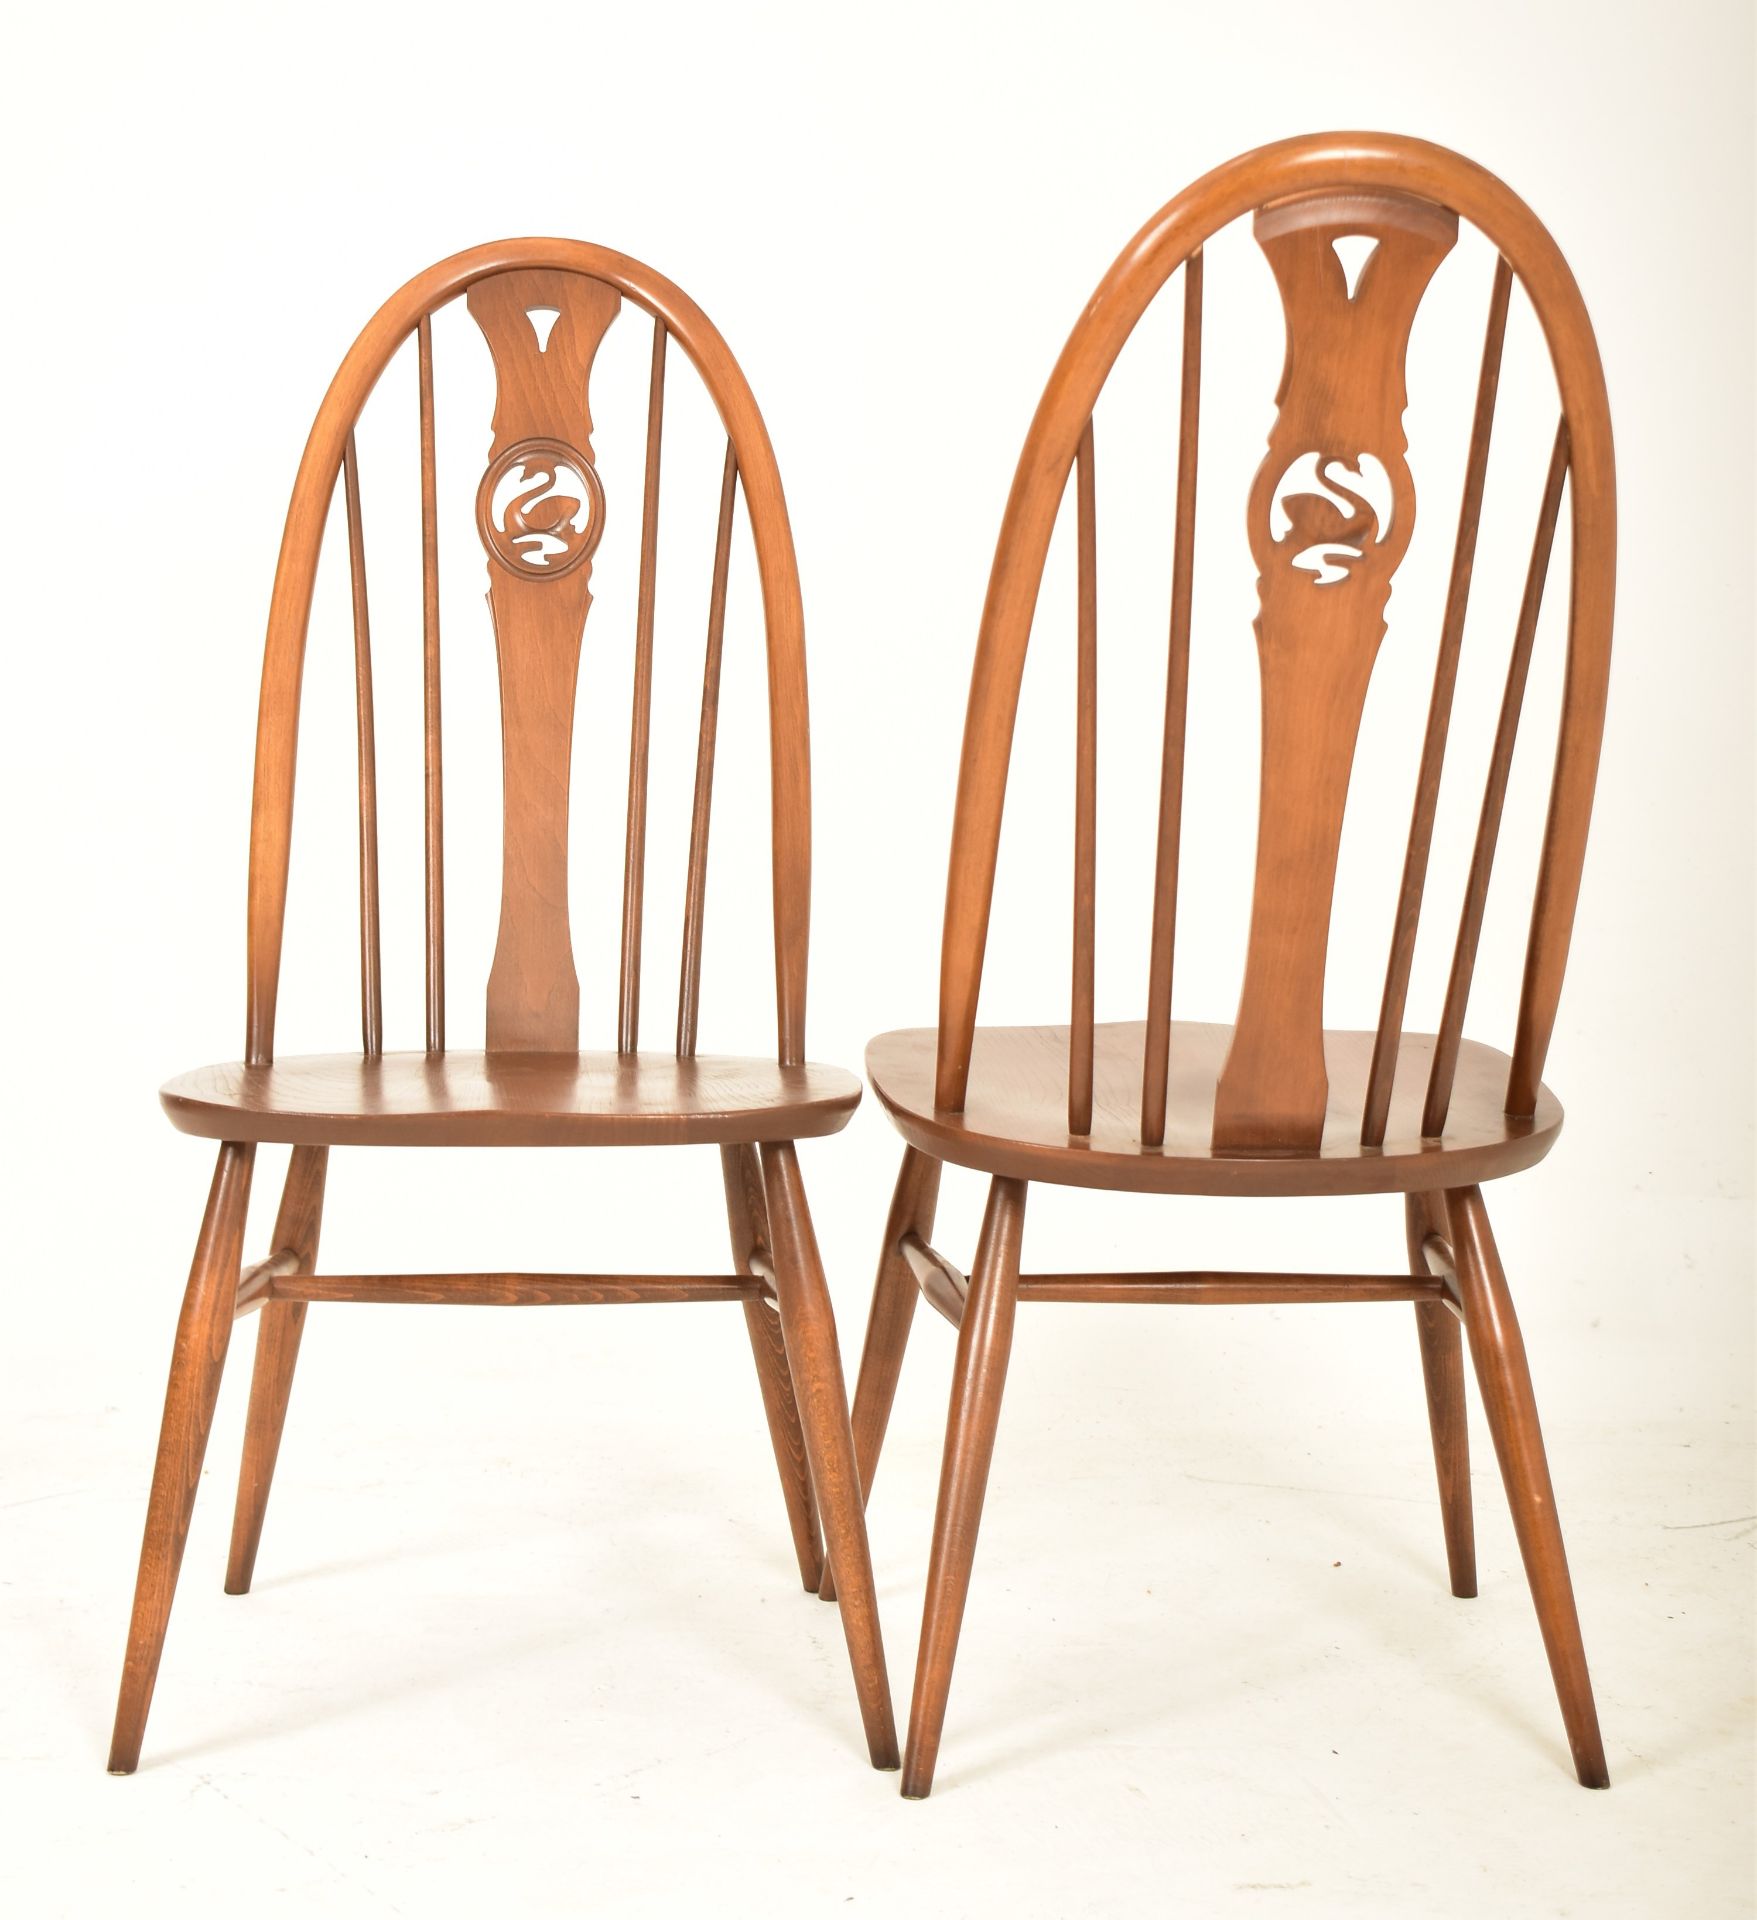 FIVE MID CENTURY ERCOL WINDSOR SWAN-BACK DINING CHAIRS - Image 2 of 4